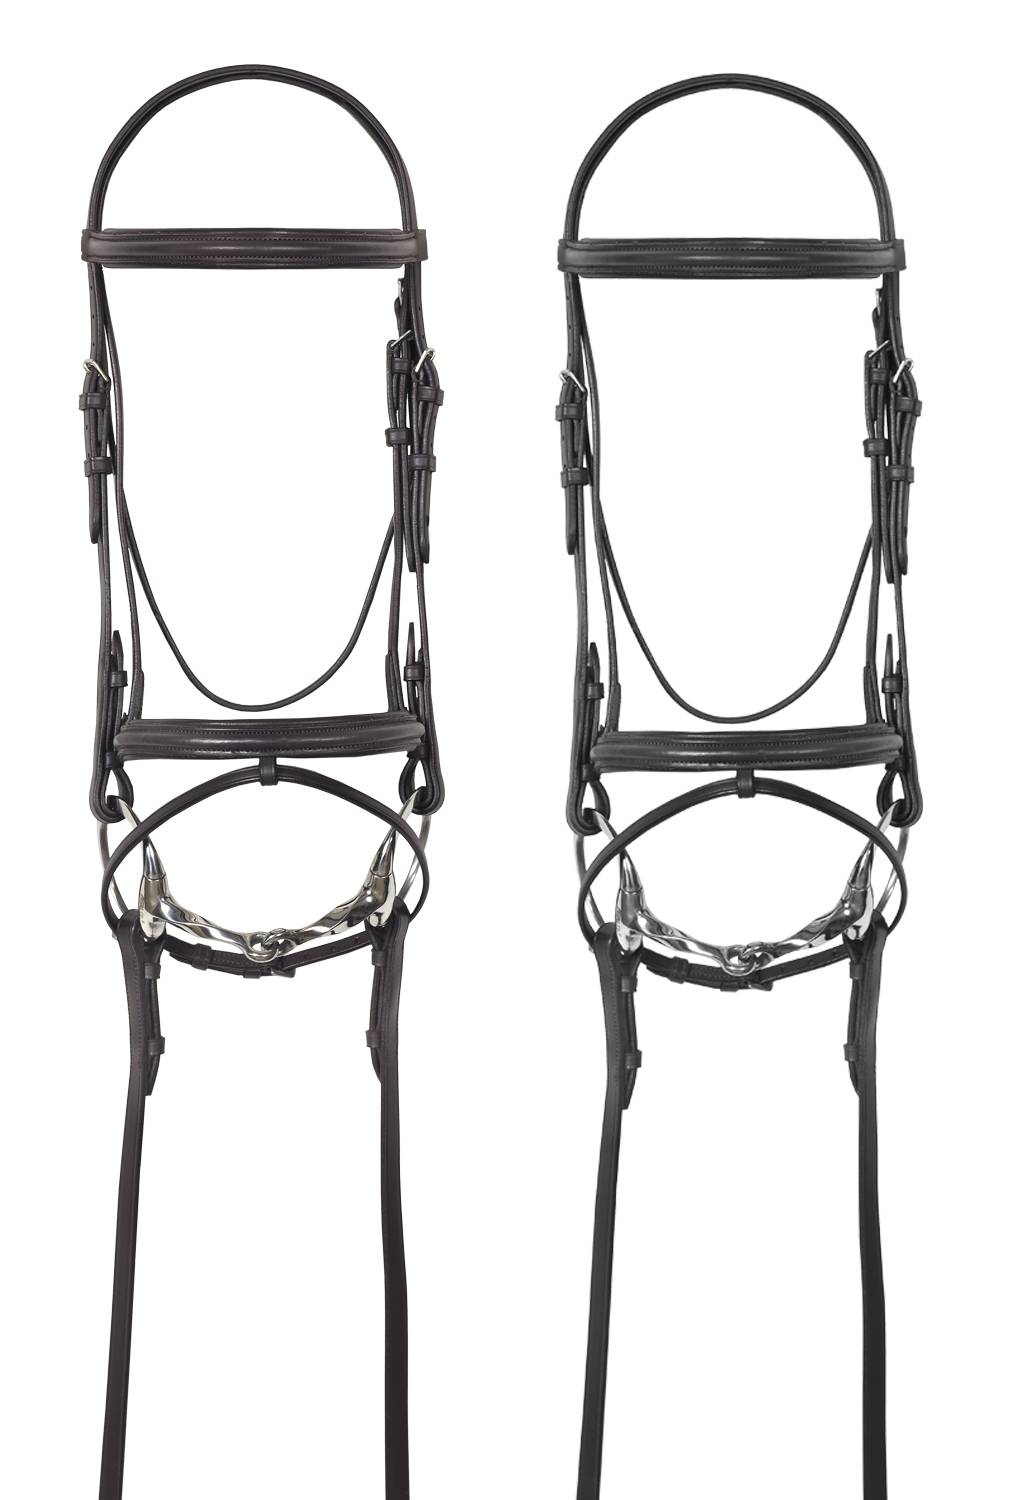 Camelot  Lined Event Bridle with Flash and Rubber Grip Reins